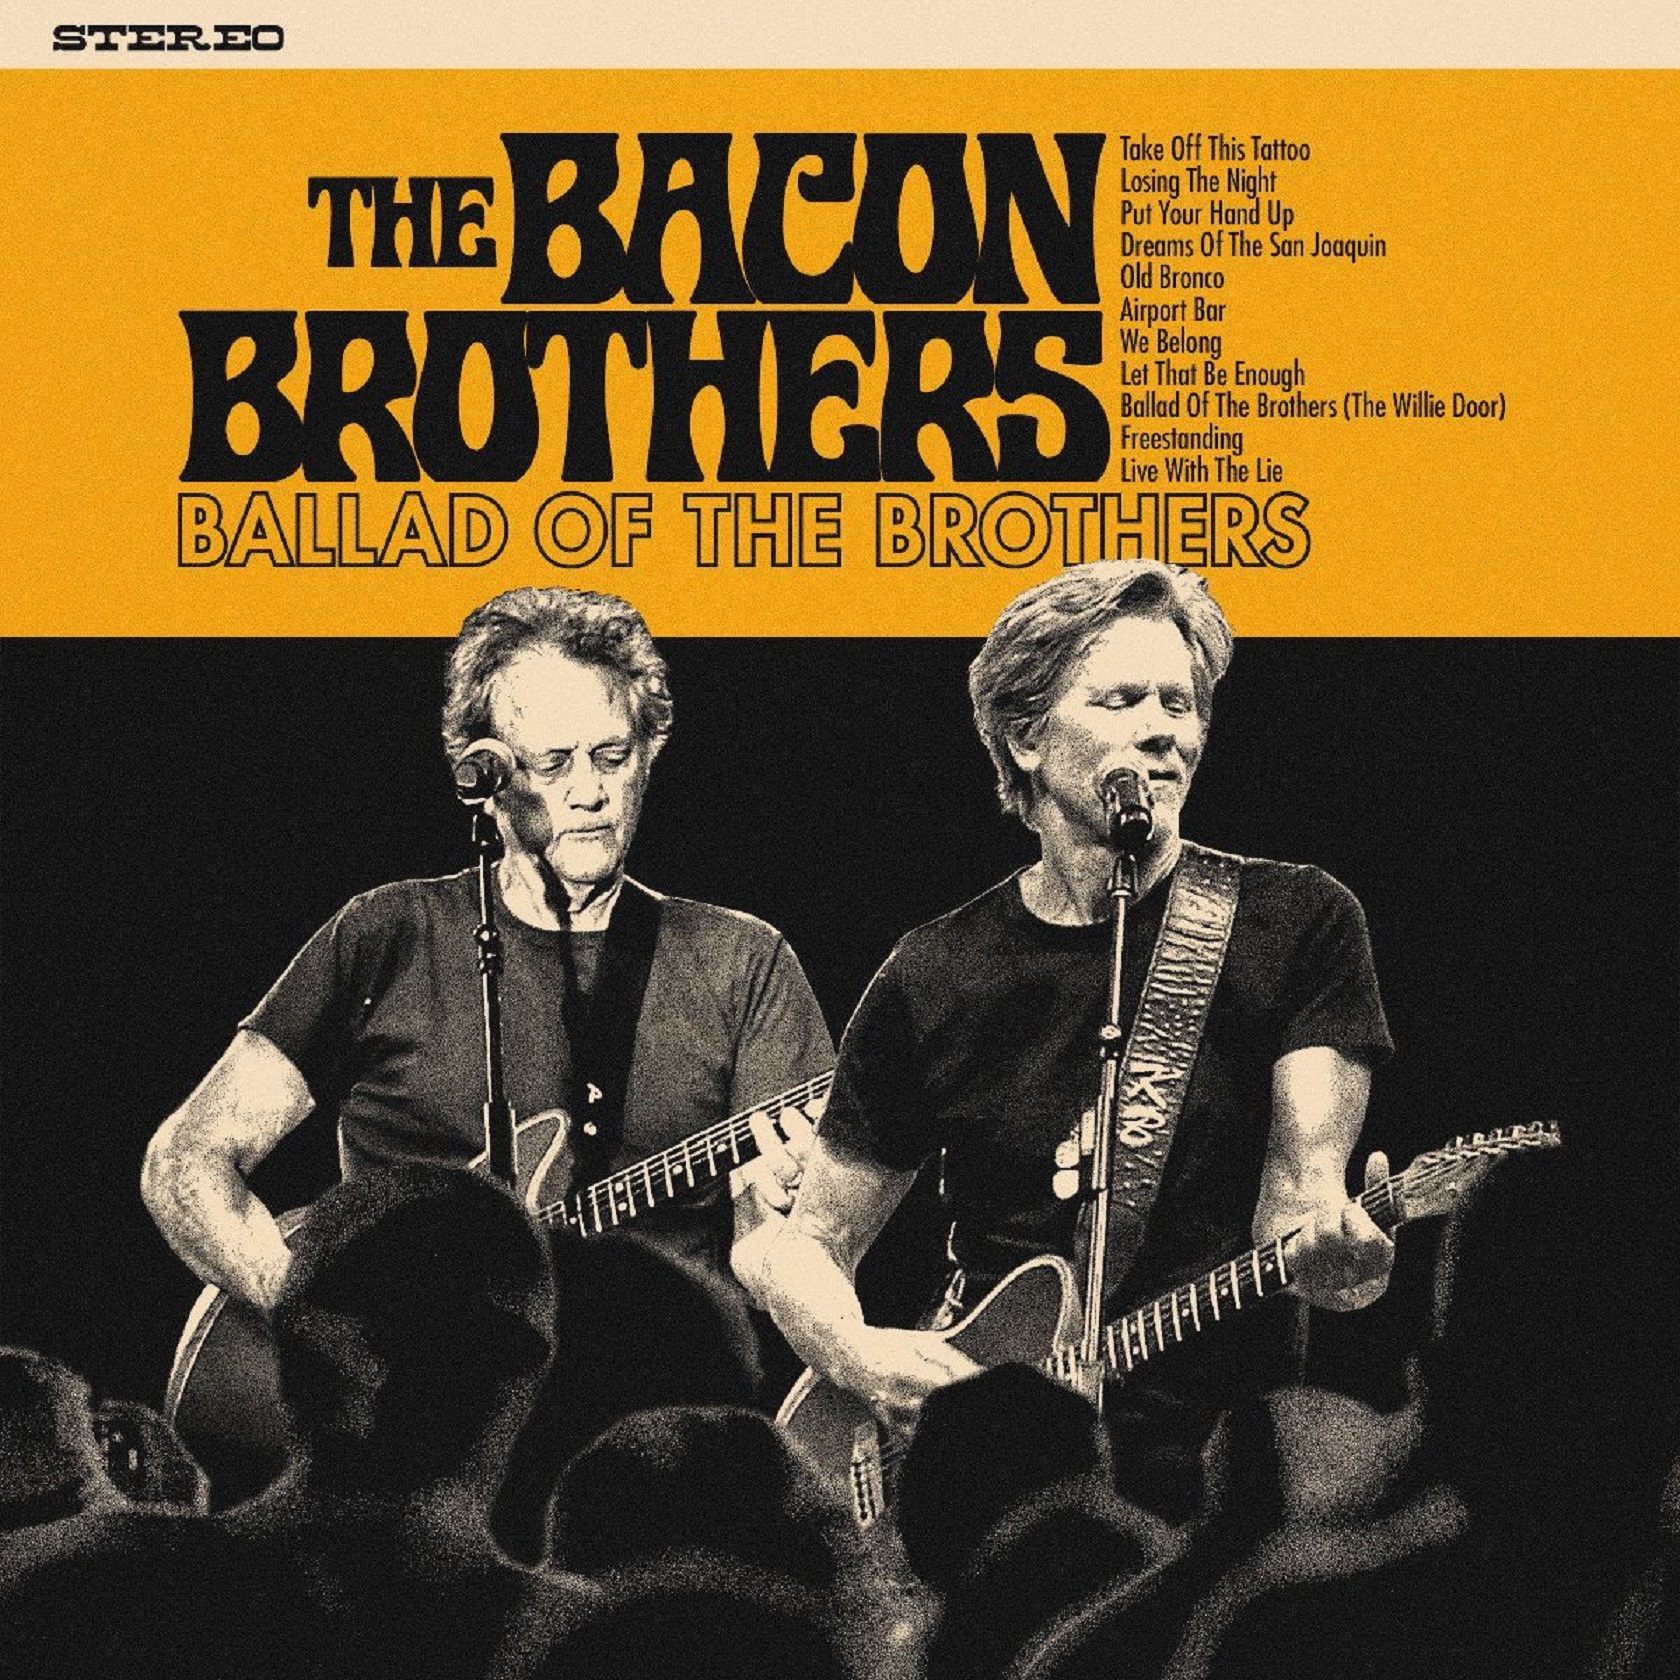  The Bacon Brothers Release New Album 'Ballad of the Bacon Brothers"